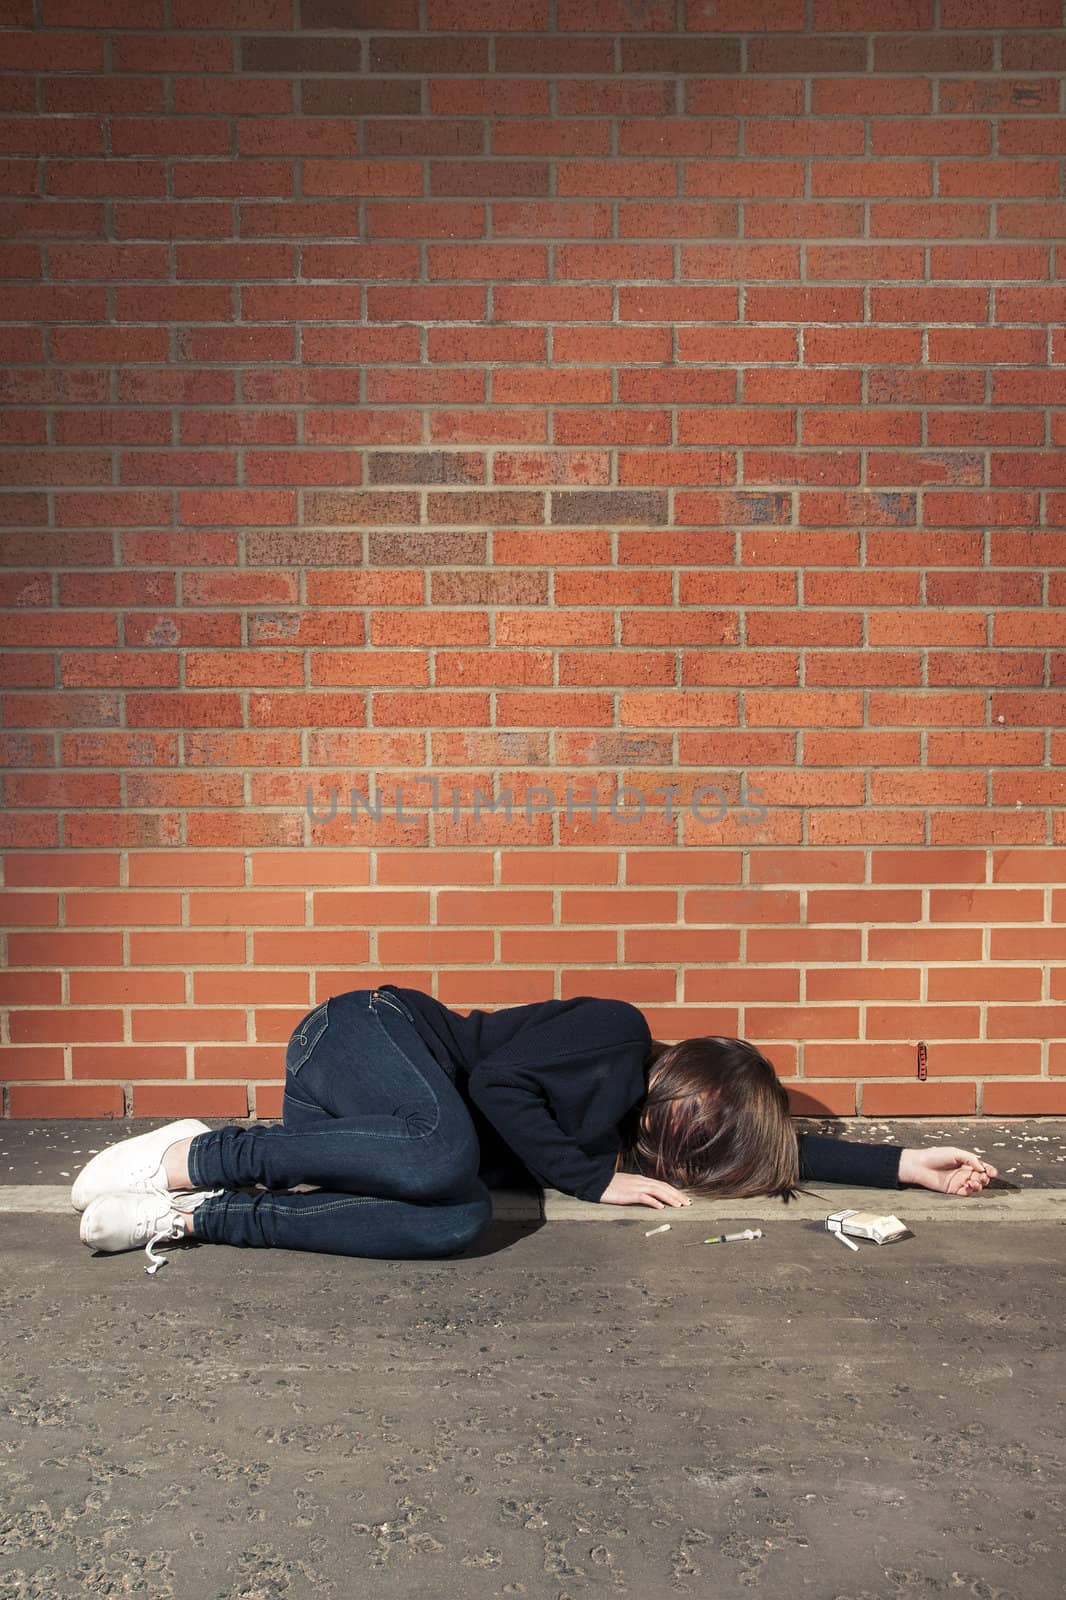 Addicted, sad young woman lying against the brick wall with syringe and cigarettes beside. Vertical.